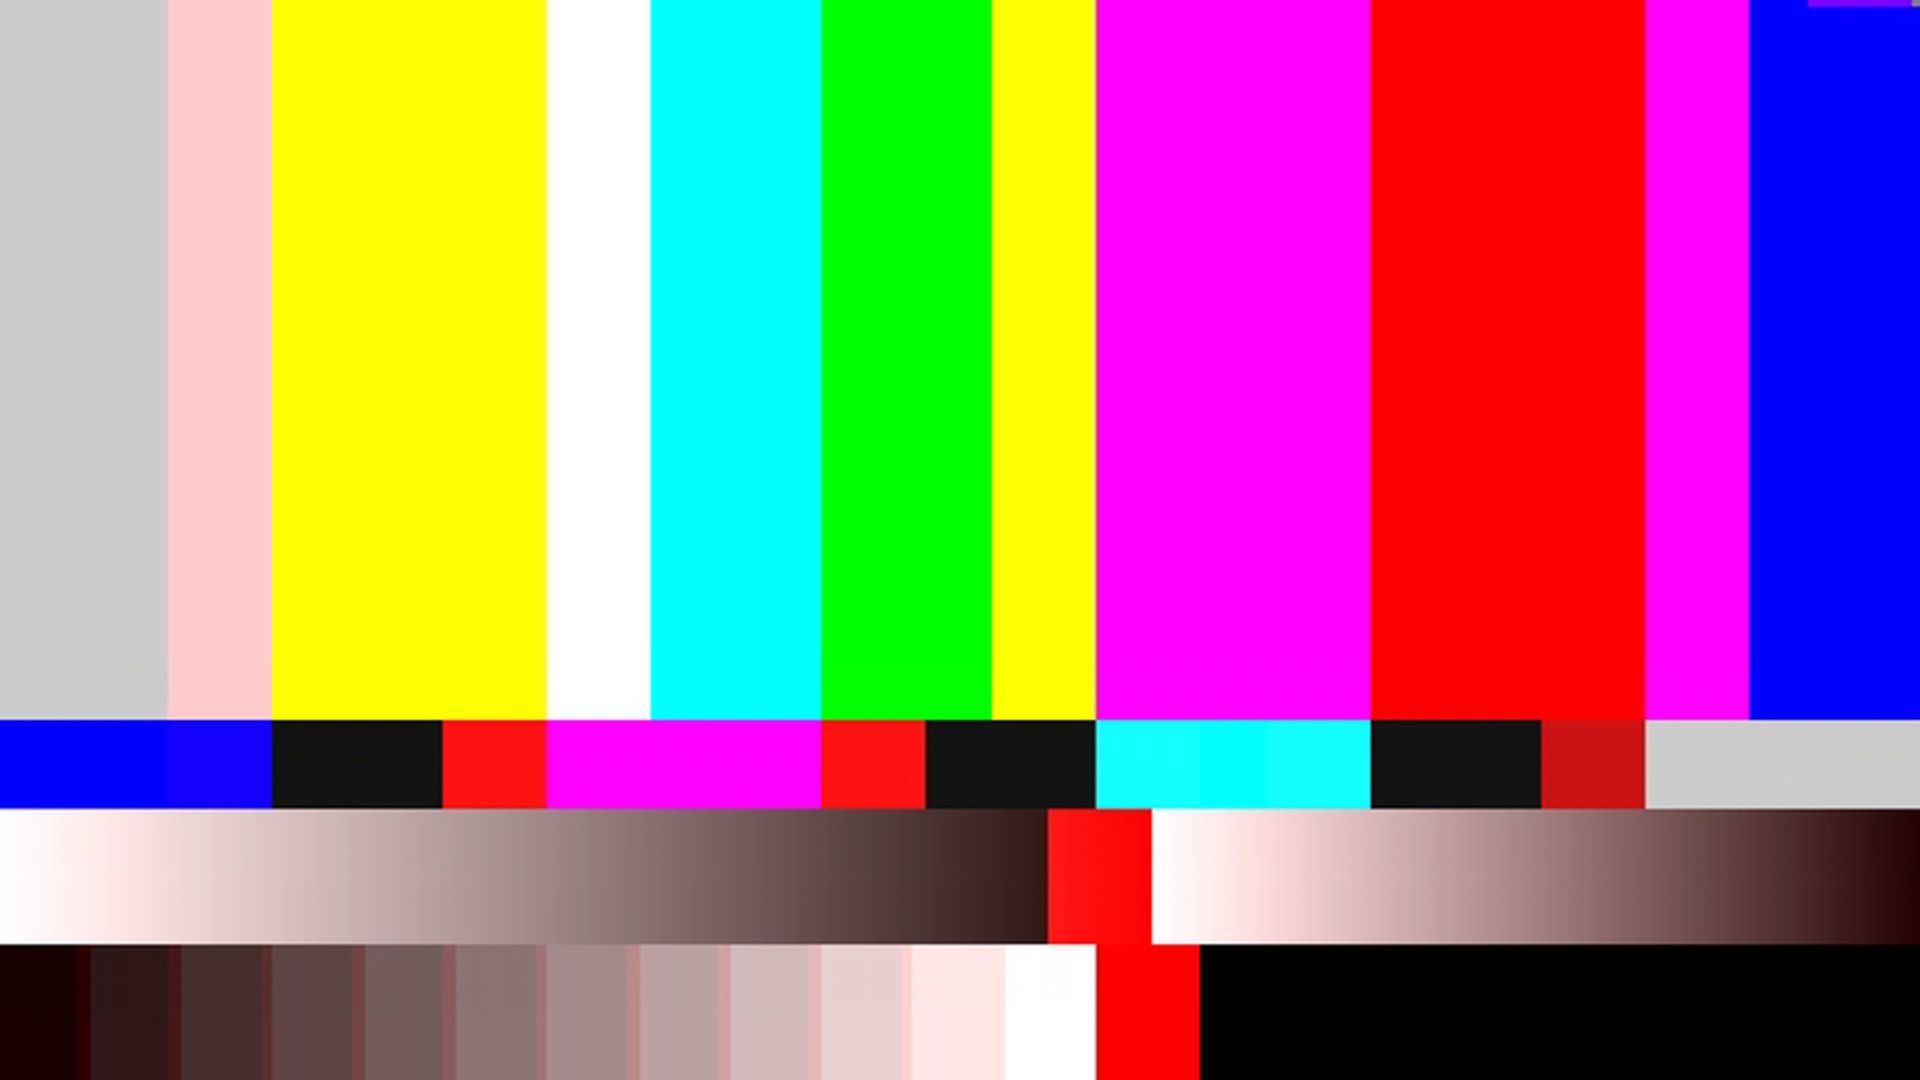 TV Color Bars Malfunction HD Video Clips & Stock Video Footage at Videezy!